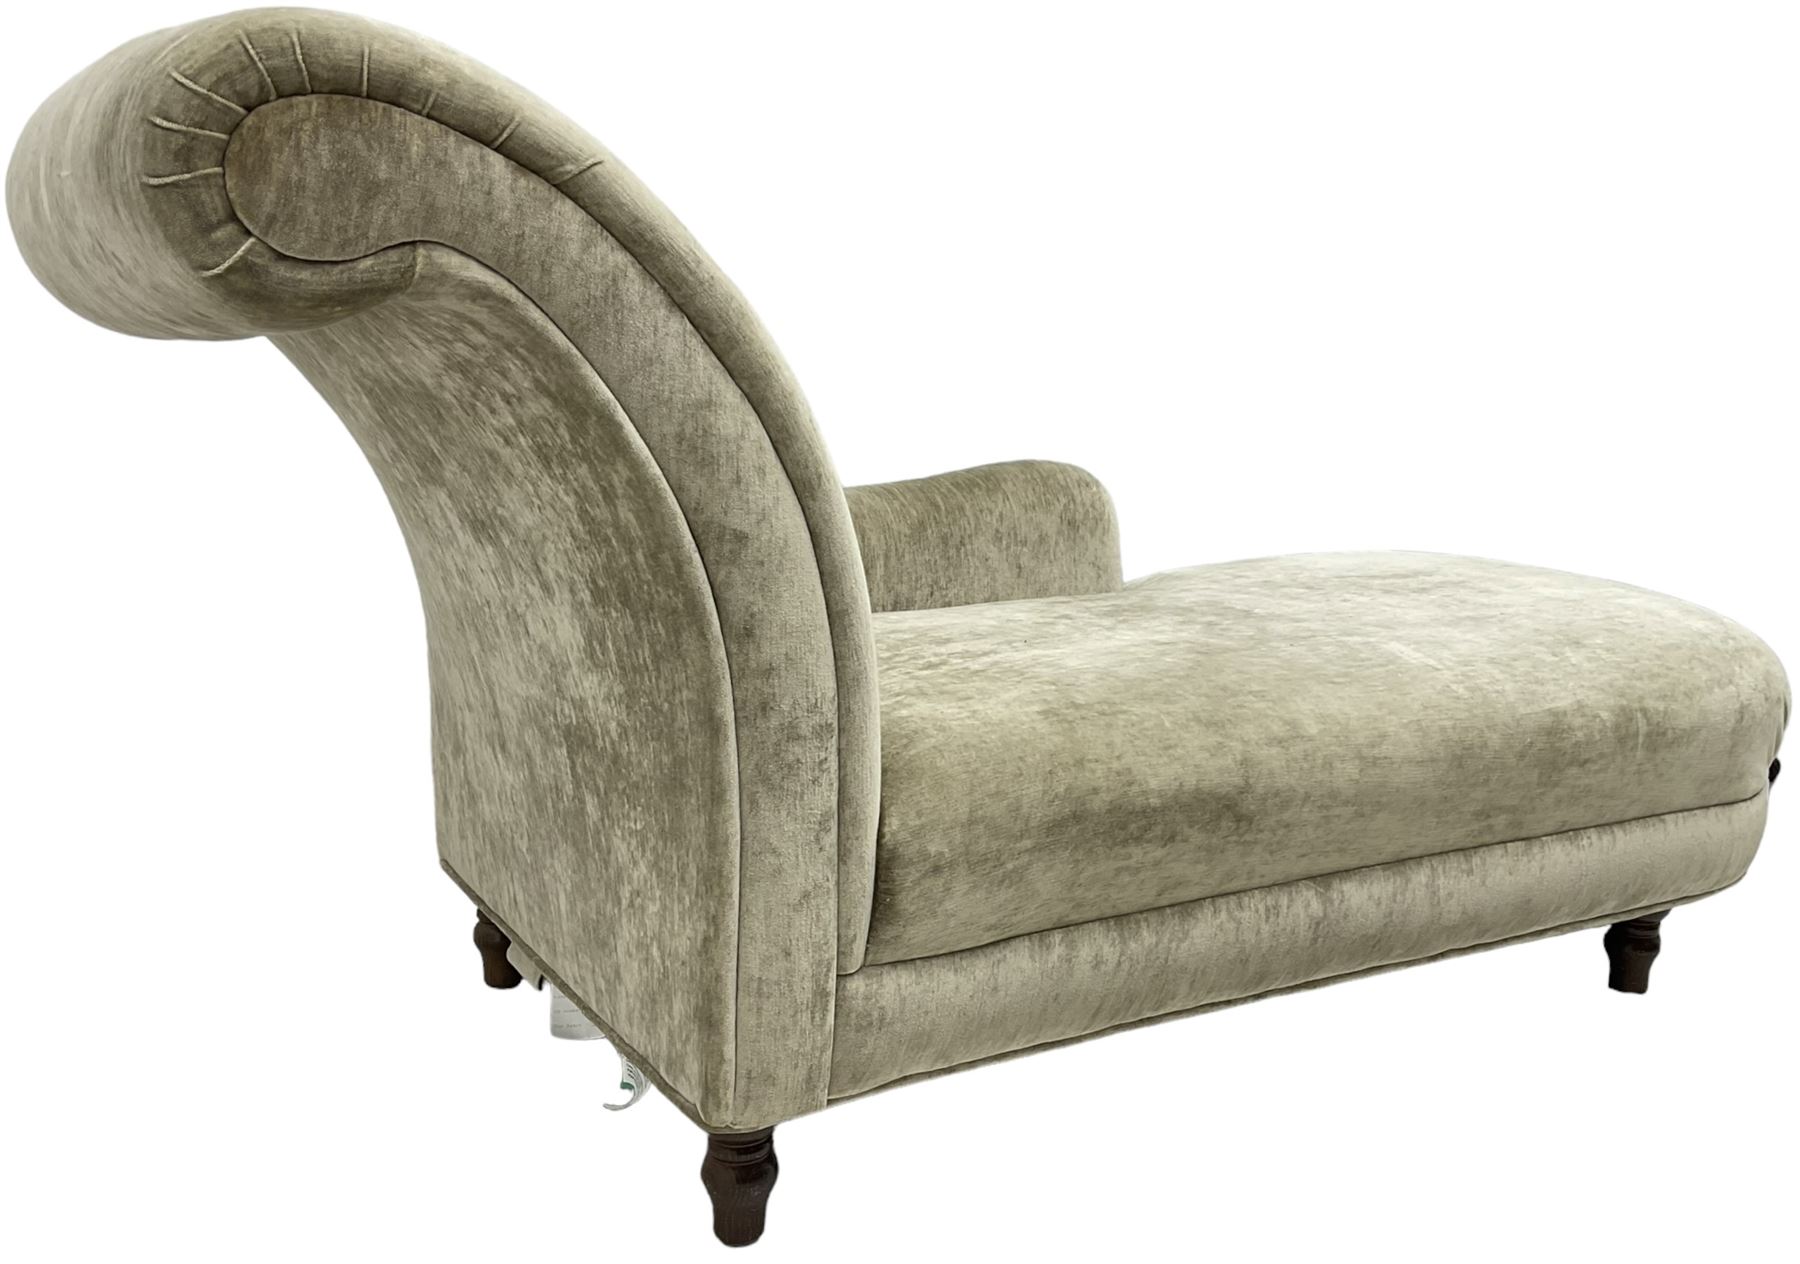 Contemporary chaise longue with scrolled back - Image 7 of 8